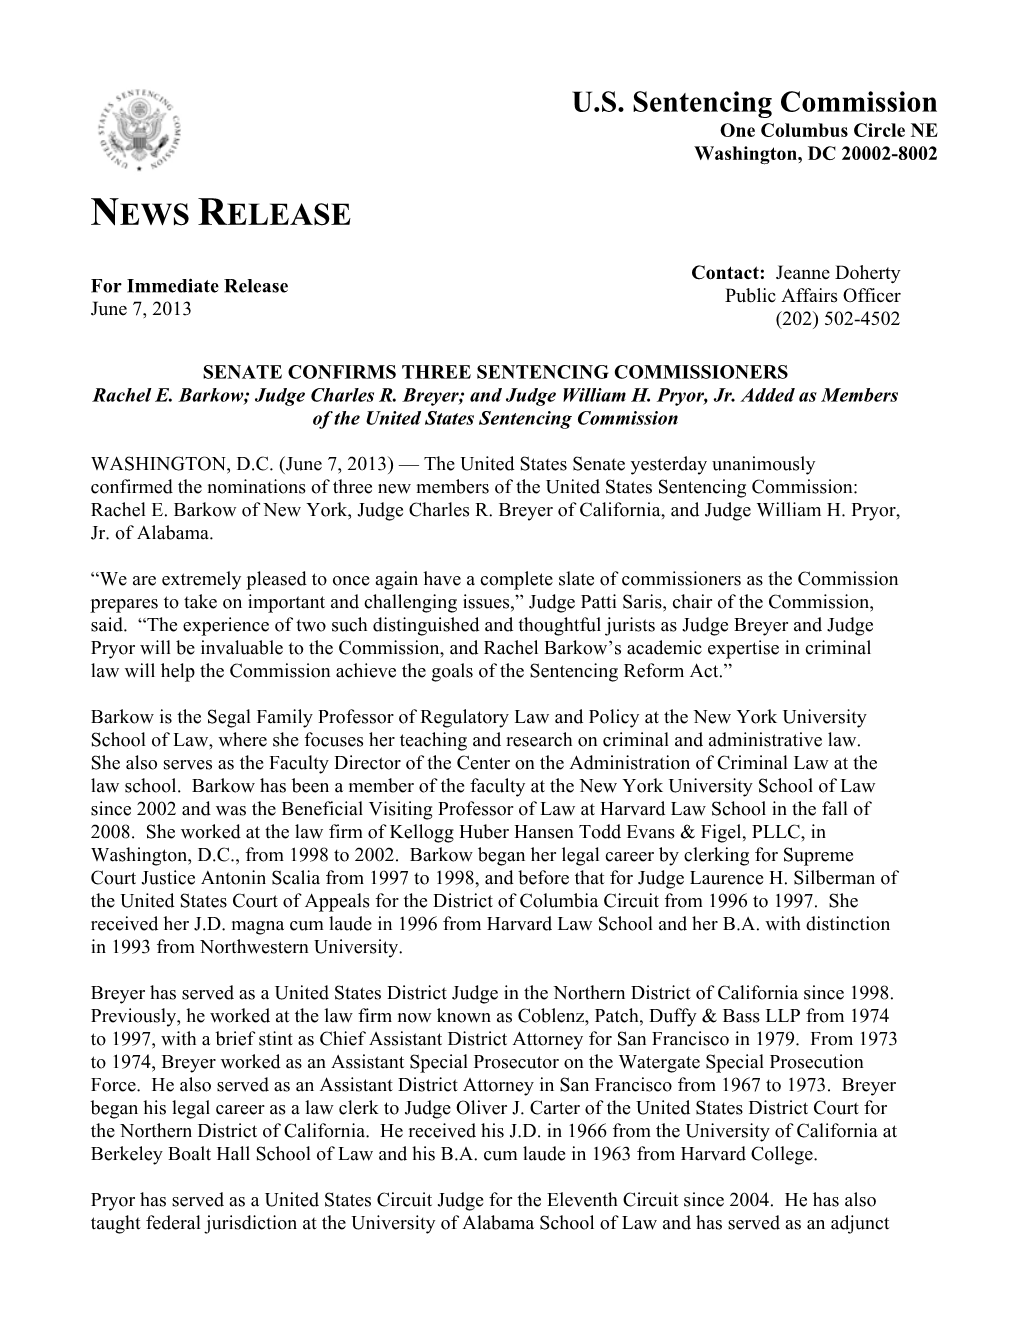 News Release: Senate Confirms Three Sentencing Commissioners